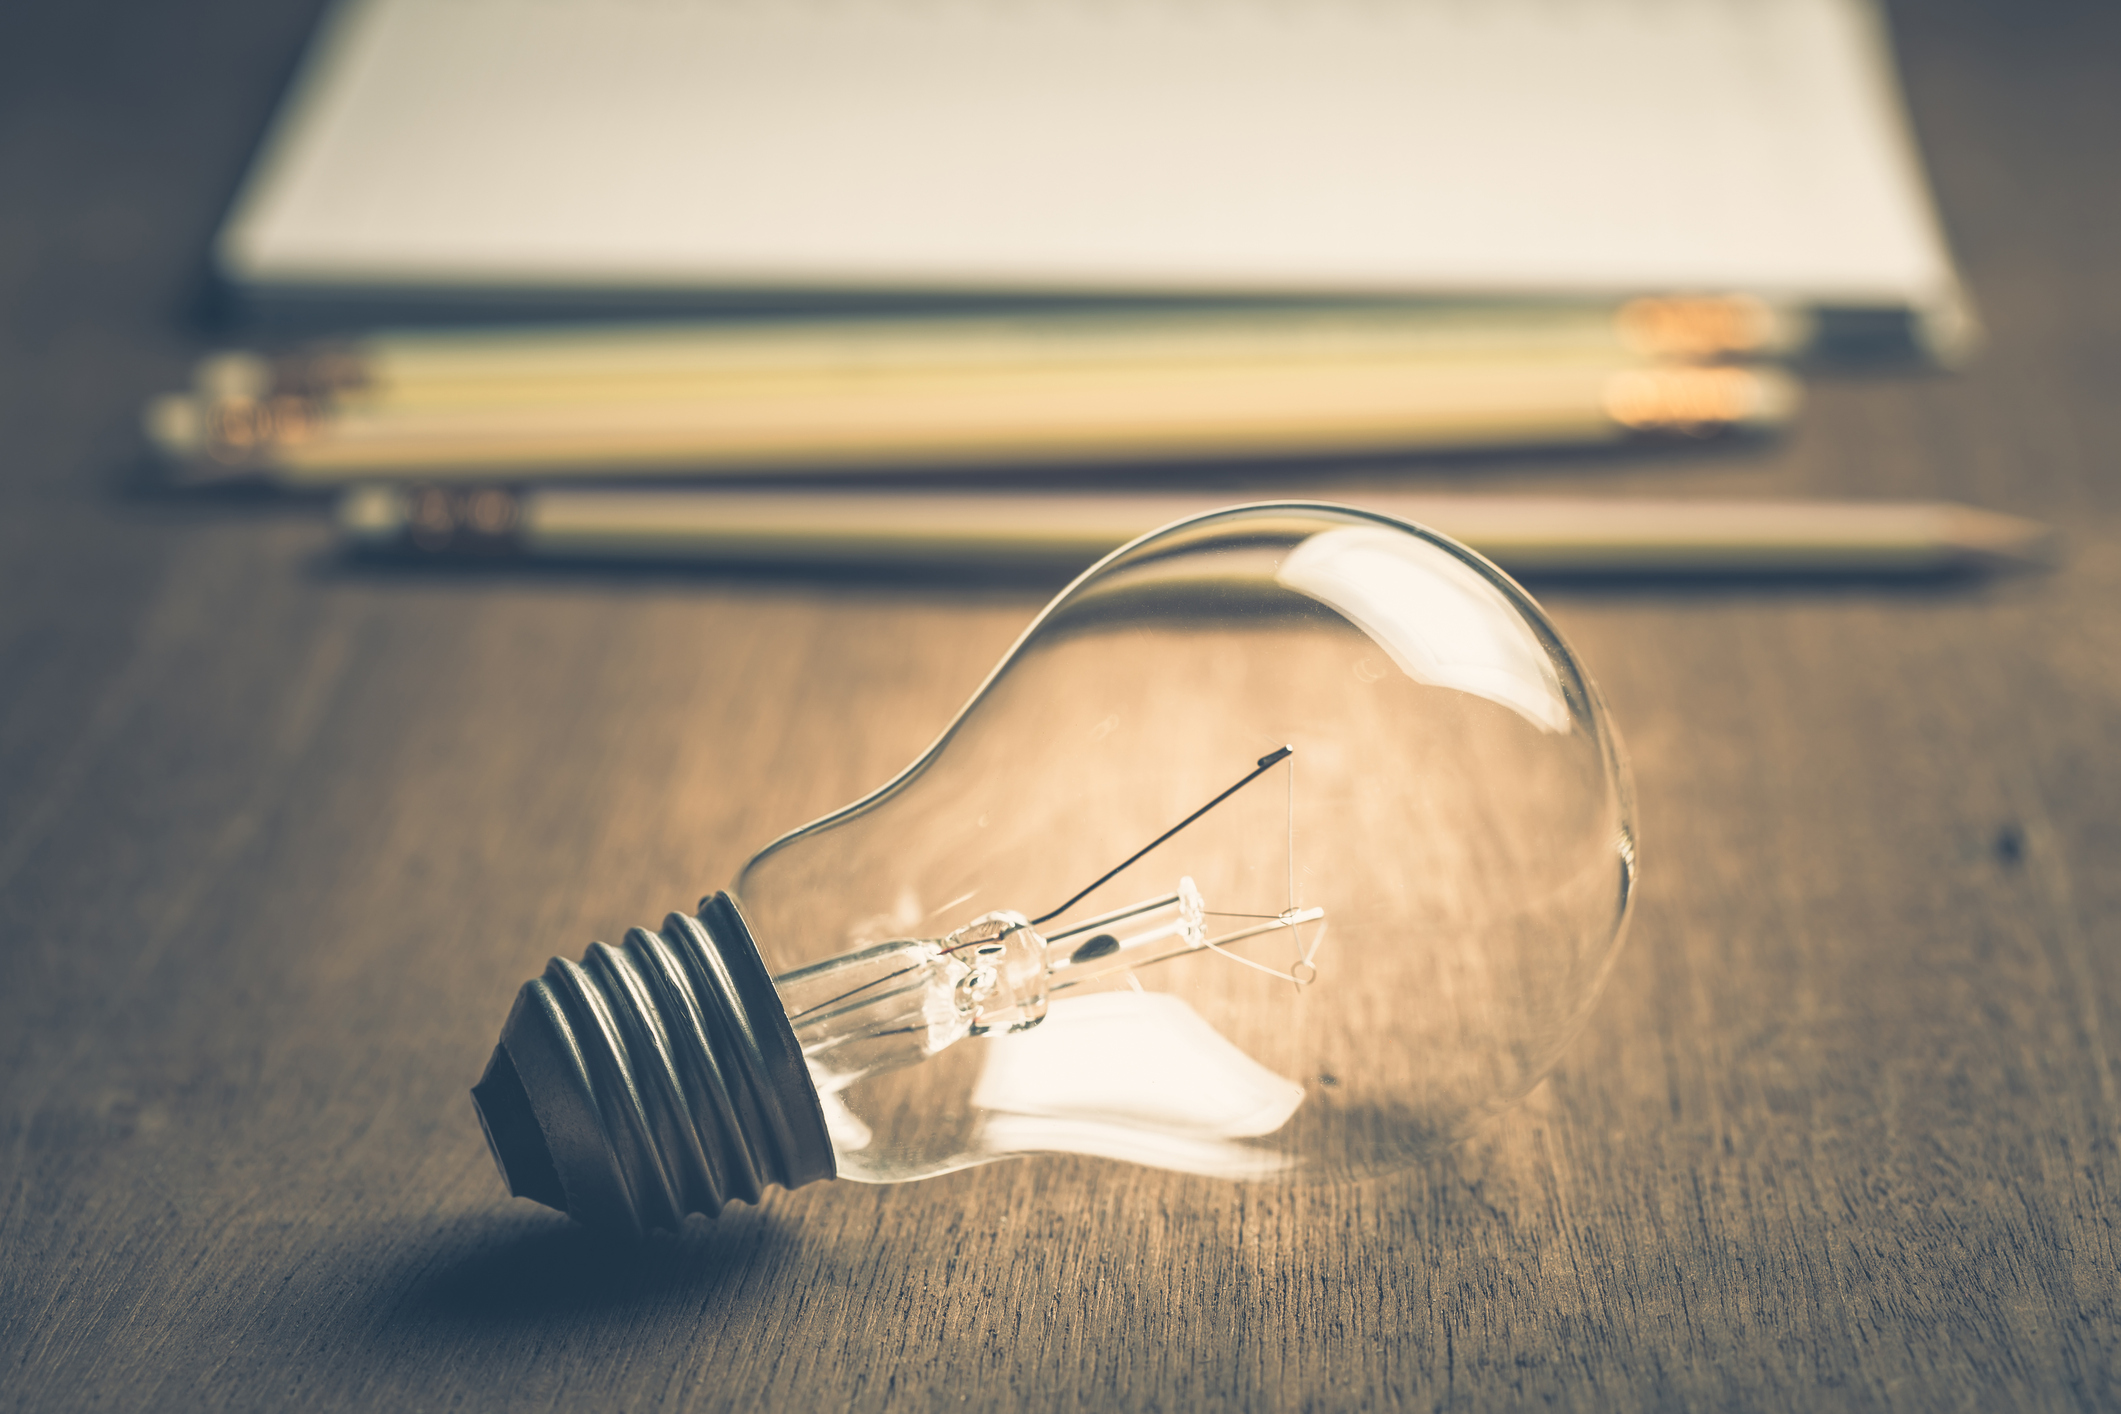 Light bulb with pencils and notebook on background